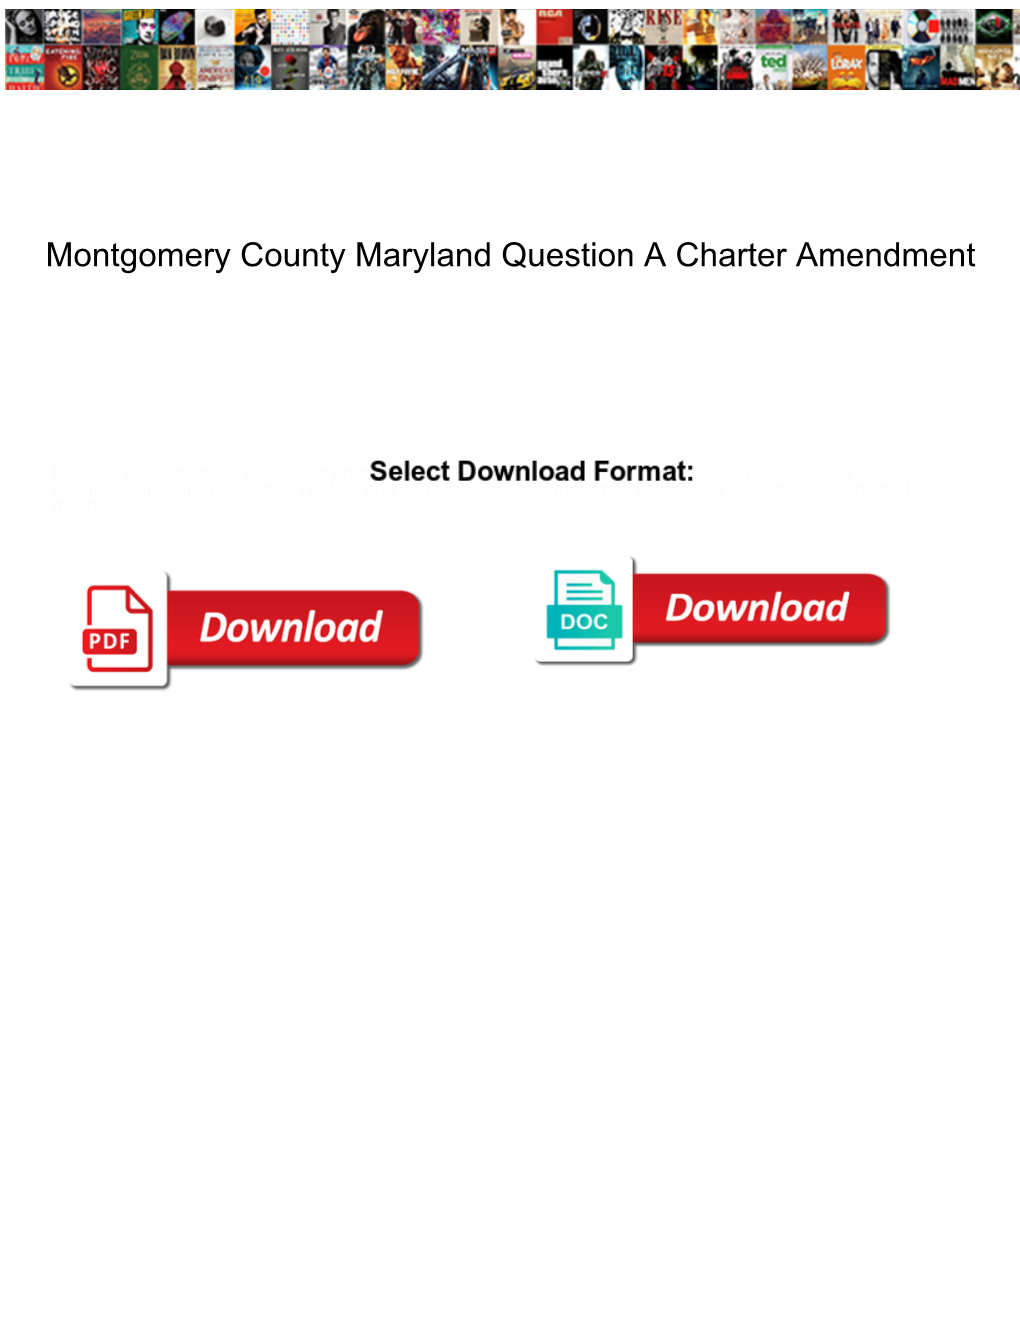 Montgomery County Maryland Question a Charter Amendment